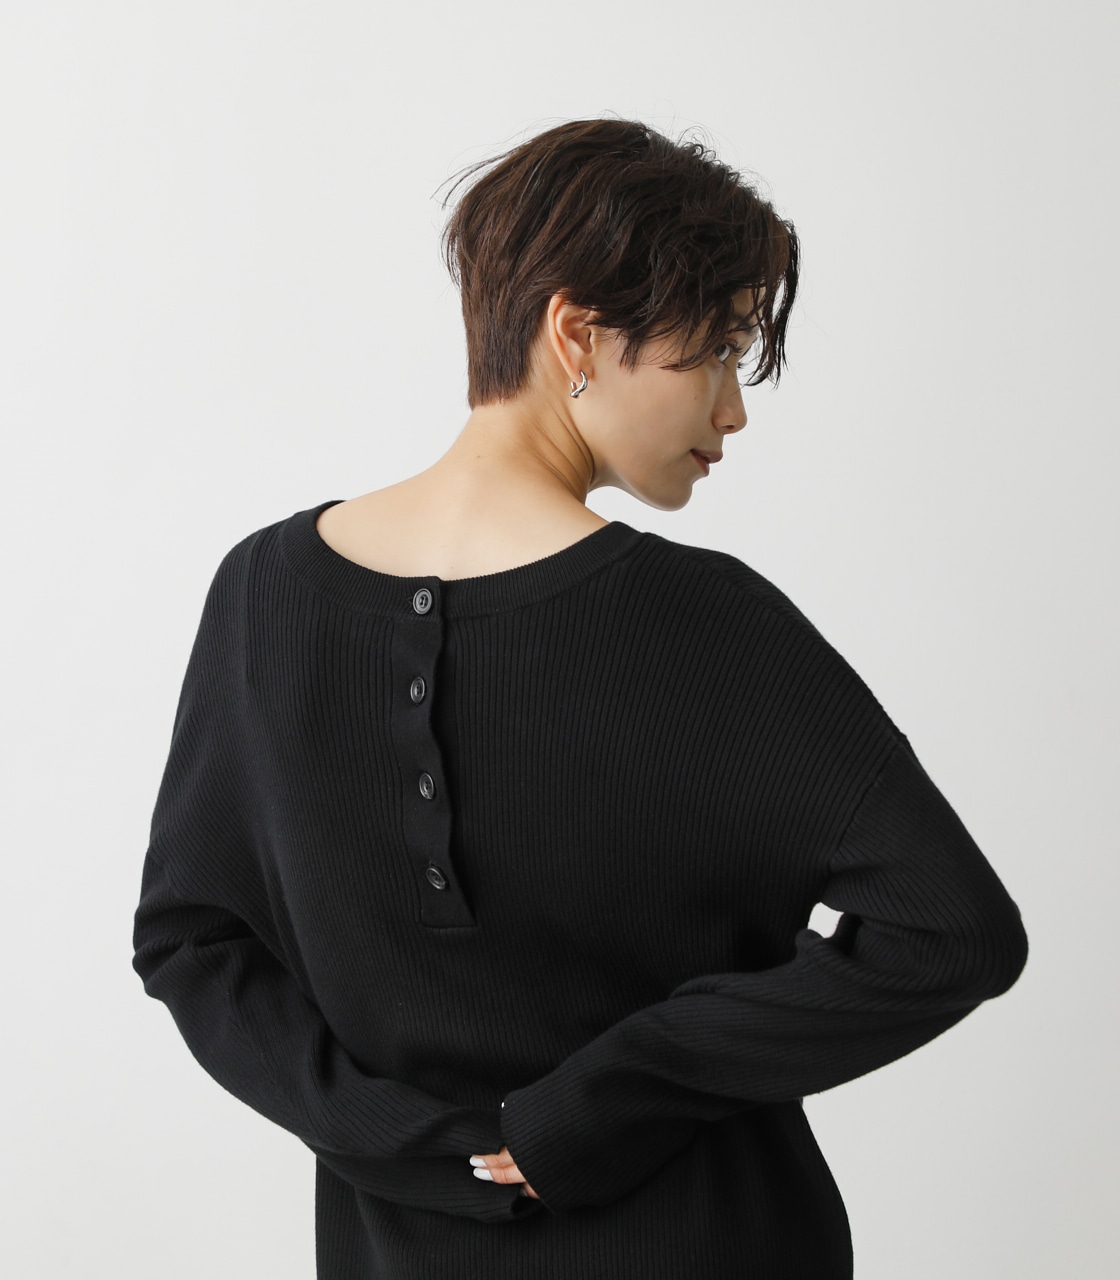 2WAY RIB KNIT LONG TOPS/2WAYリブニットロングトップス 詳細画像 BLK 3